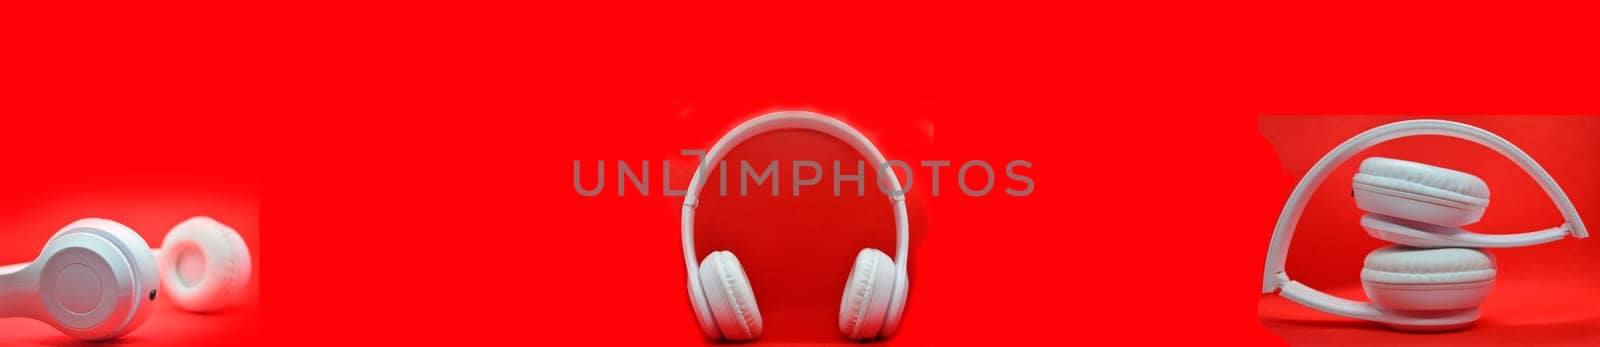 White headphones placed on a red background, used as a background image.